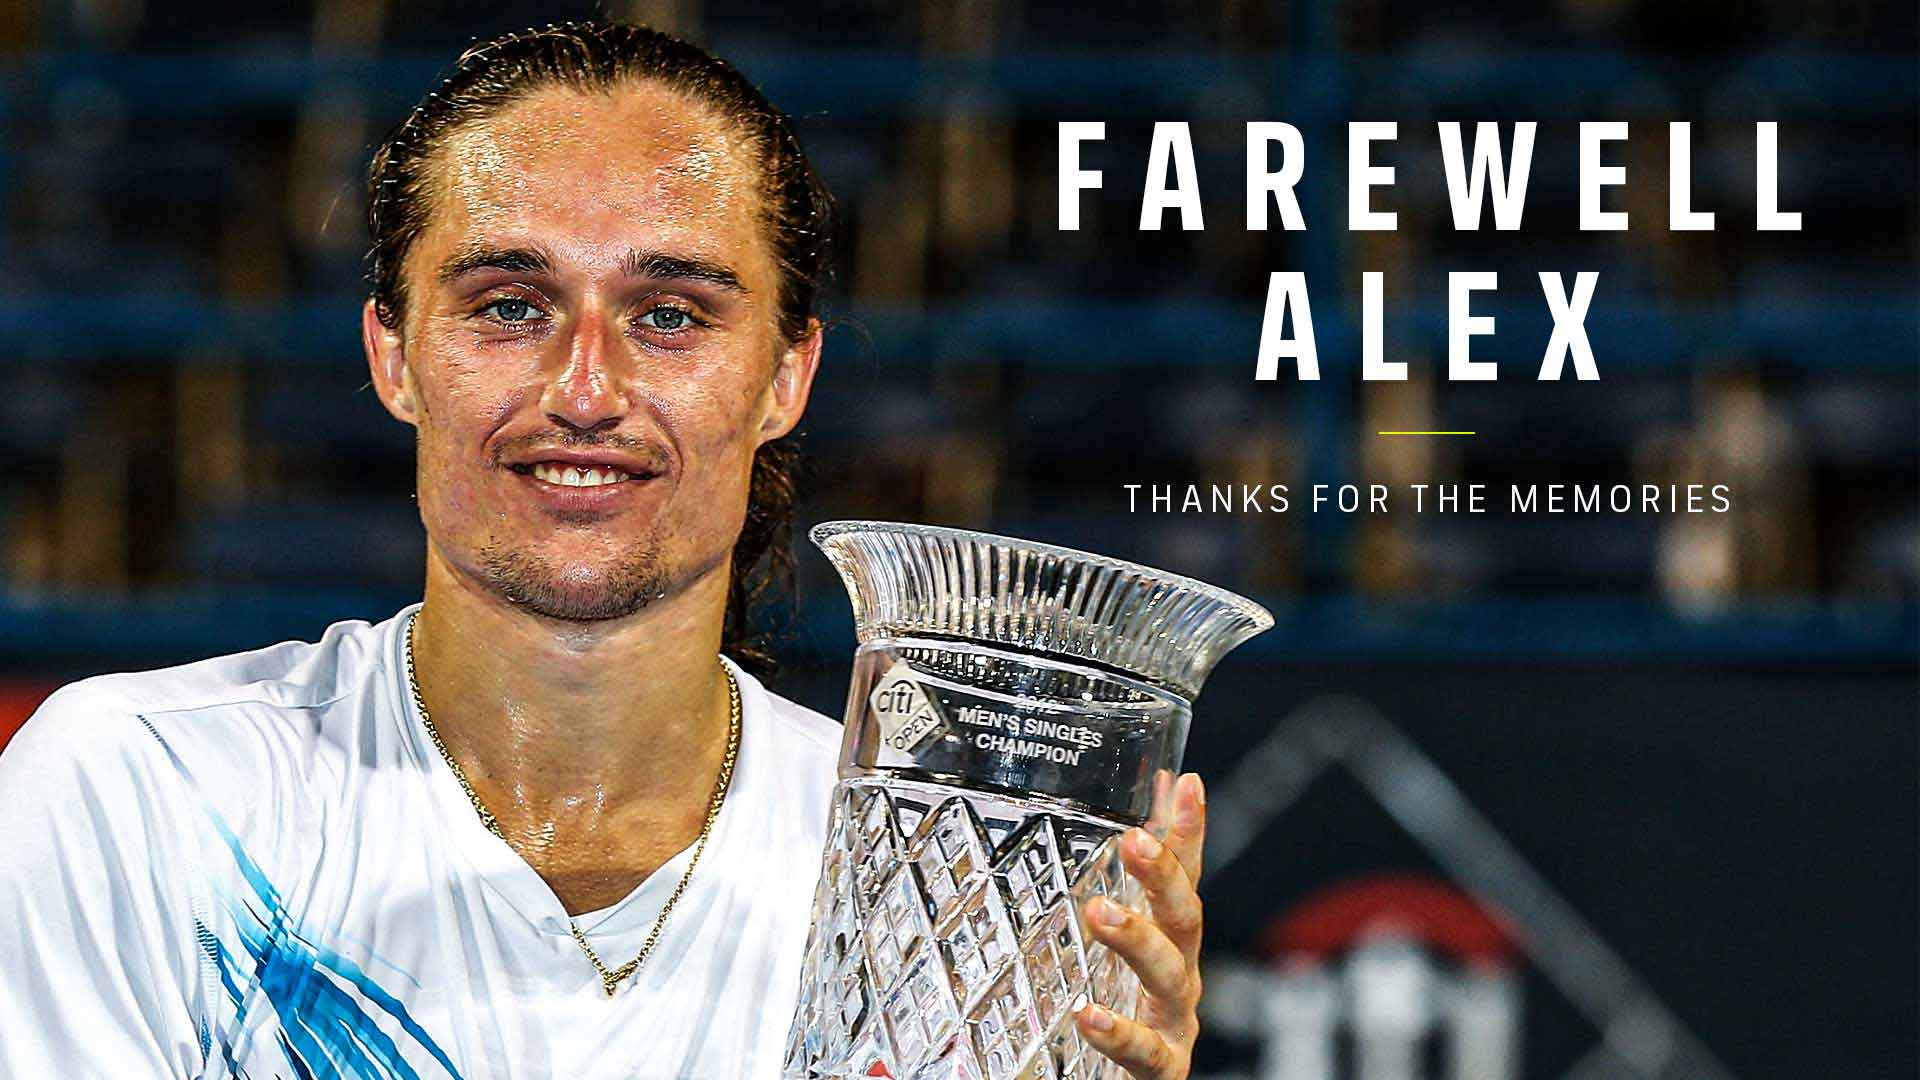 Alexandr Dolgopolov, who won the biggest title of his career at the 2012 Citi Open, has retired from professional tennis.